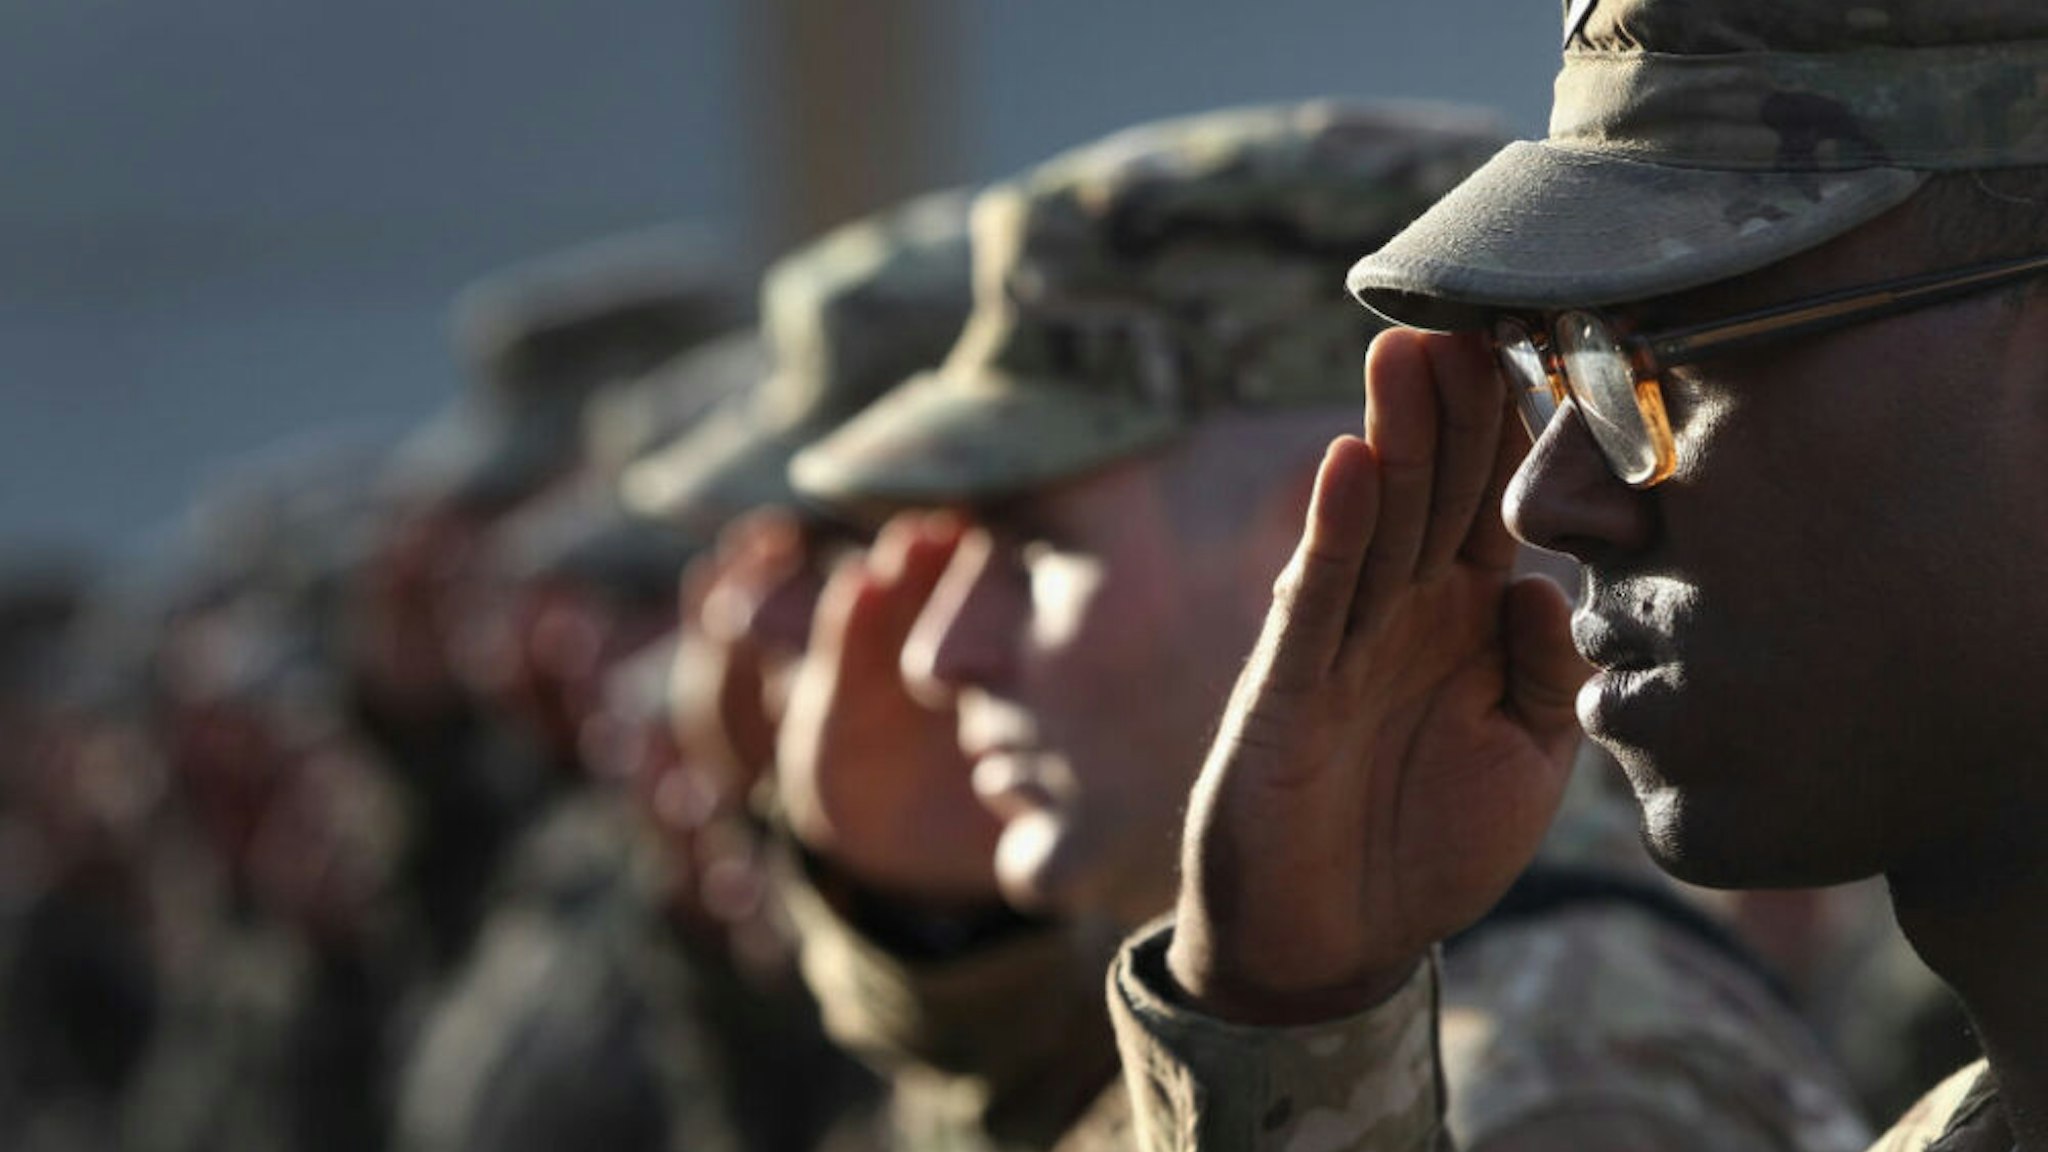 BAGRAM, AFGHANISTAN - SEPTEMBER 11: U.S. Army soldiers salute during the national anthem during the an anniversary ceremony of the terrorist attacks on September 11, 2001 on September 11, 2011 at Bagram Air Field, Afghanistan. Ten years after the 9/11 attacks in the United States and after almost a decade war in Afghanistan, American soldiers paid their respects in a solemn observence of the tragic day.